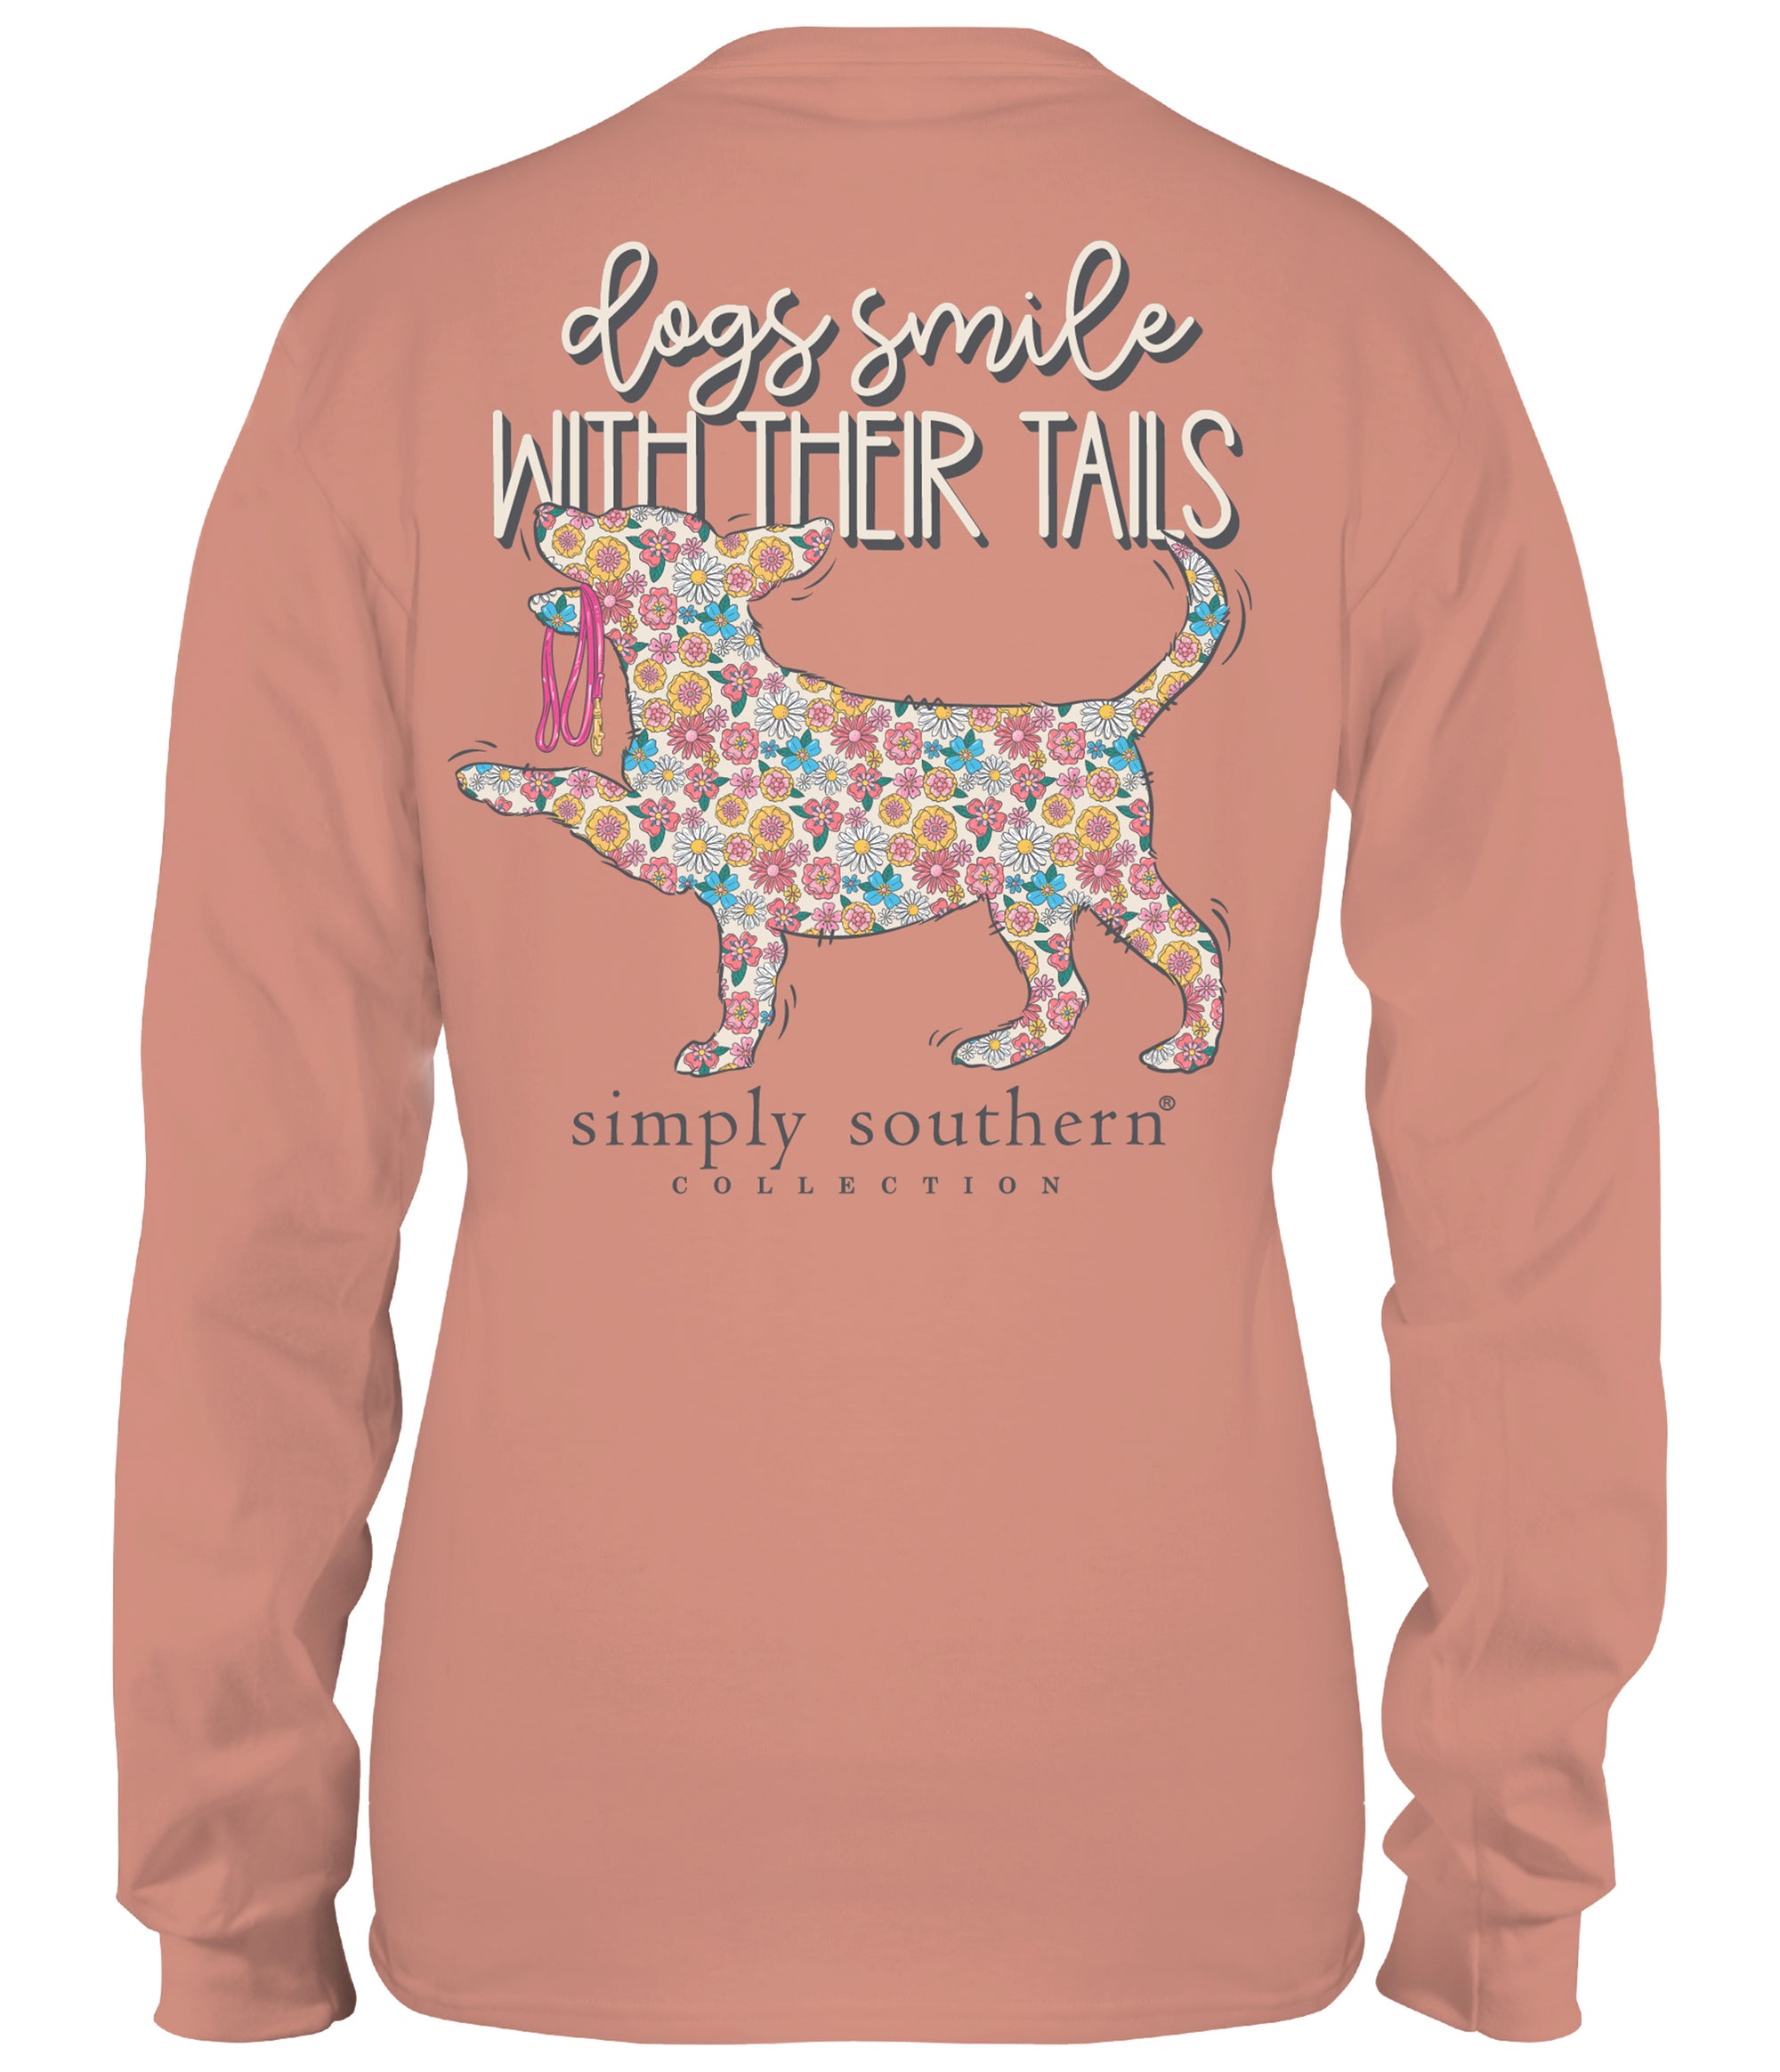 Simply Southern Dogs Smile Long Sleeve T-Shirt